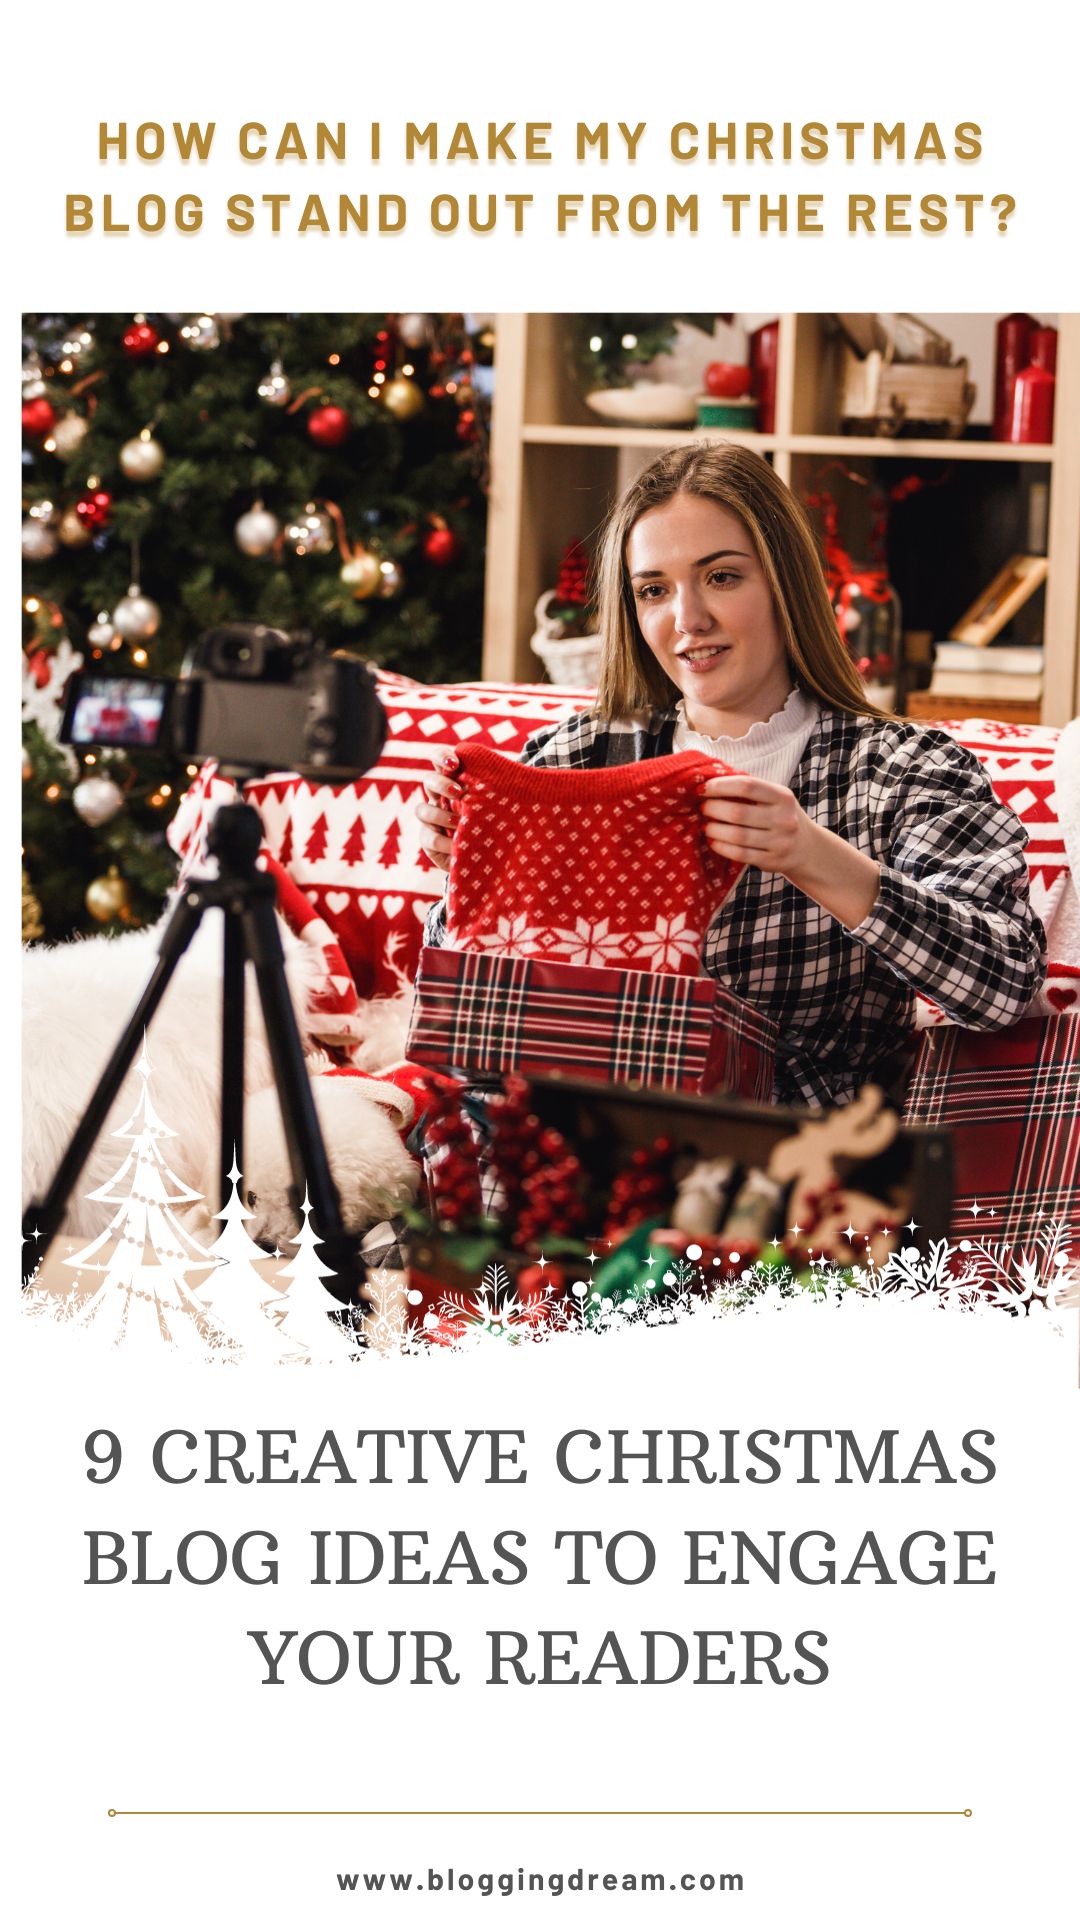 How can I make my Christmas blog stand out from the rest?